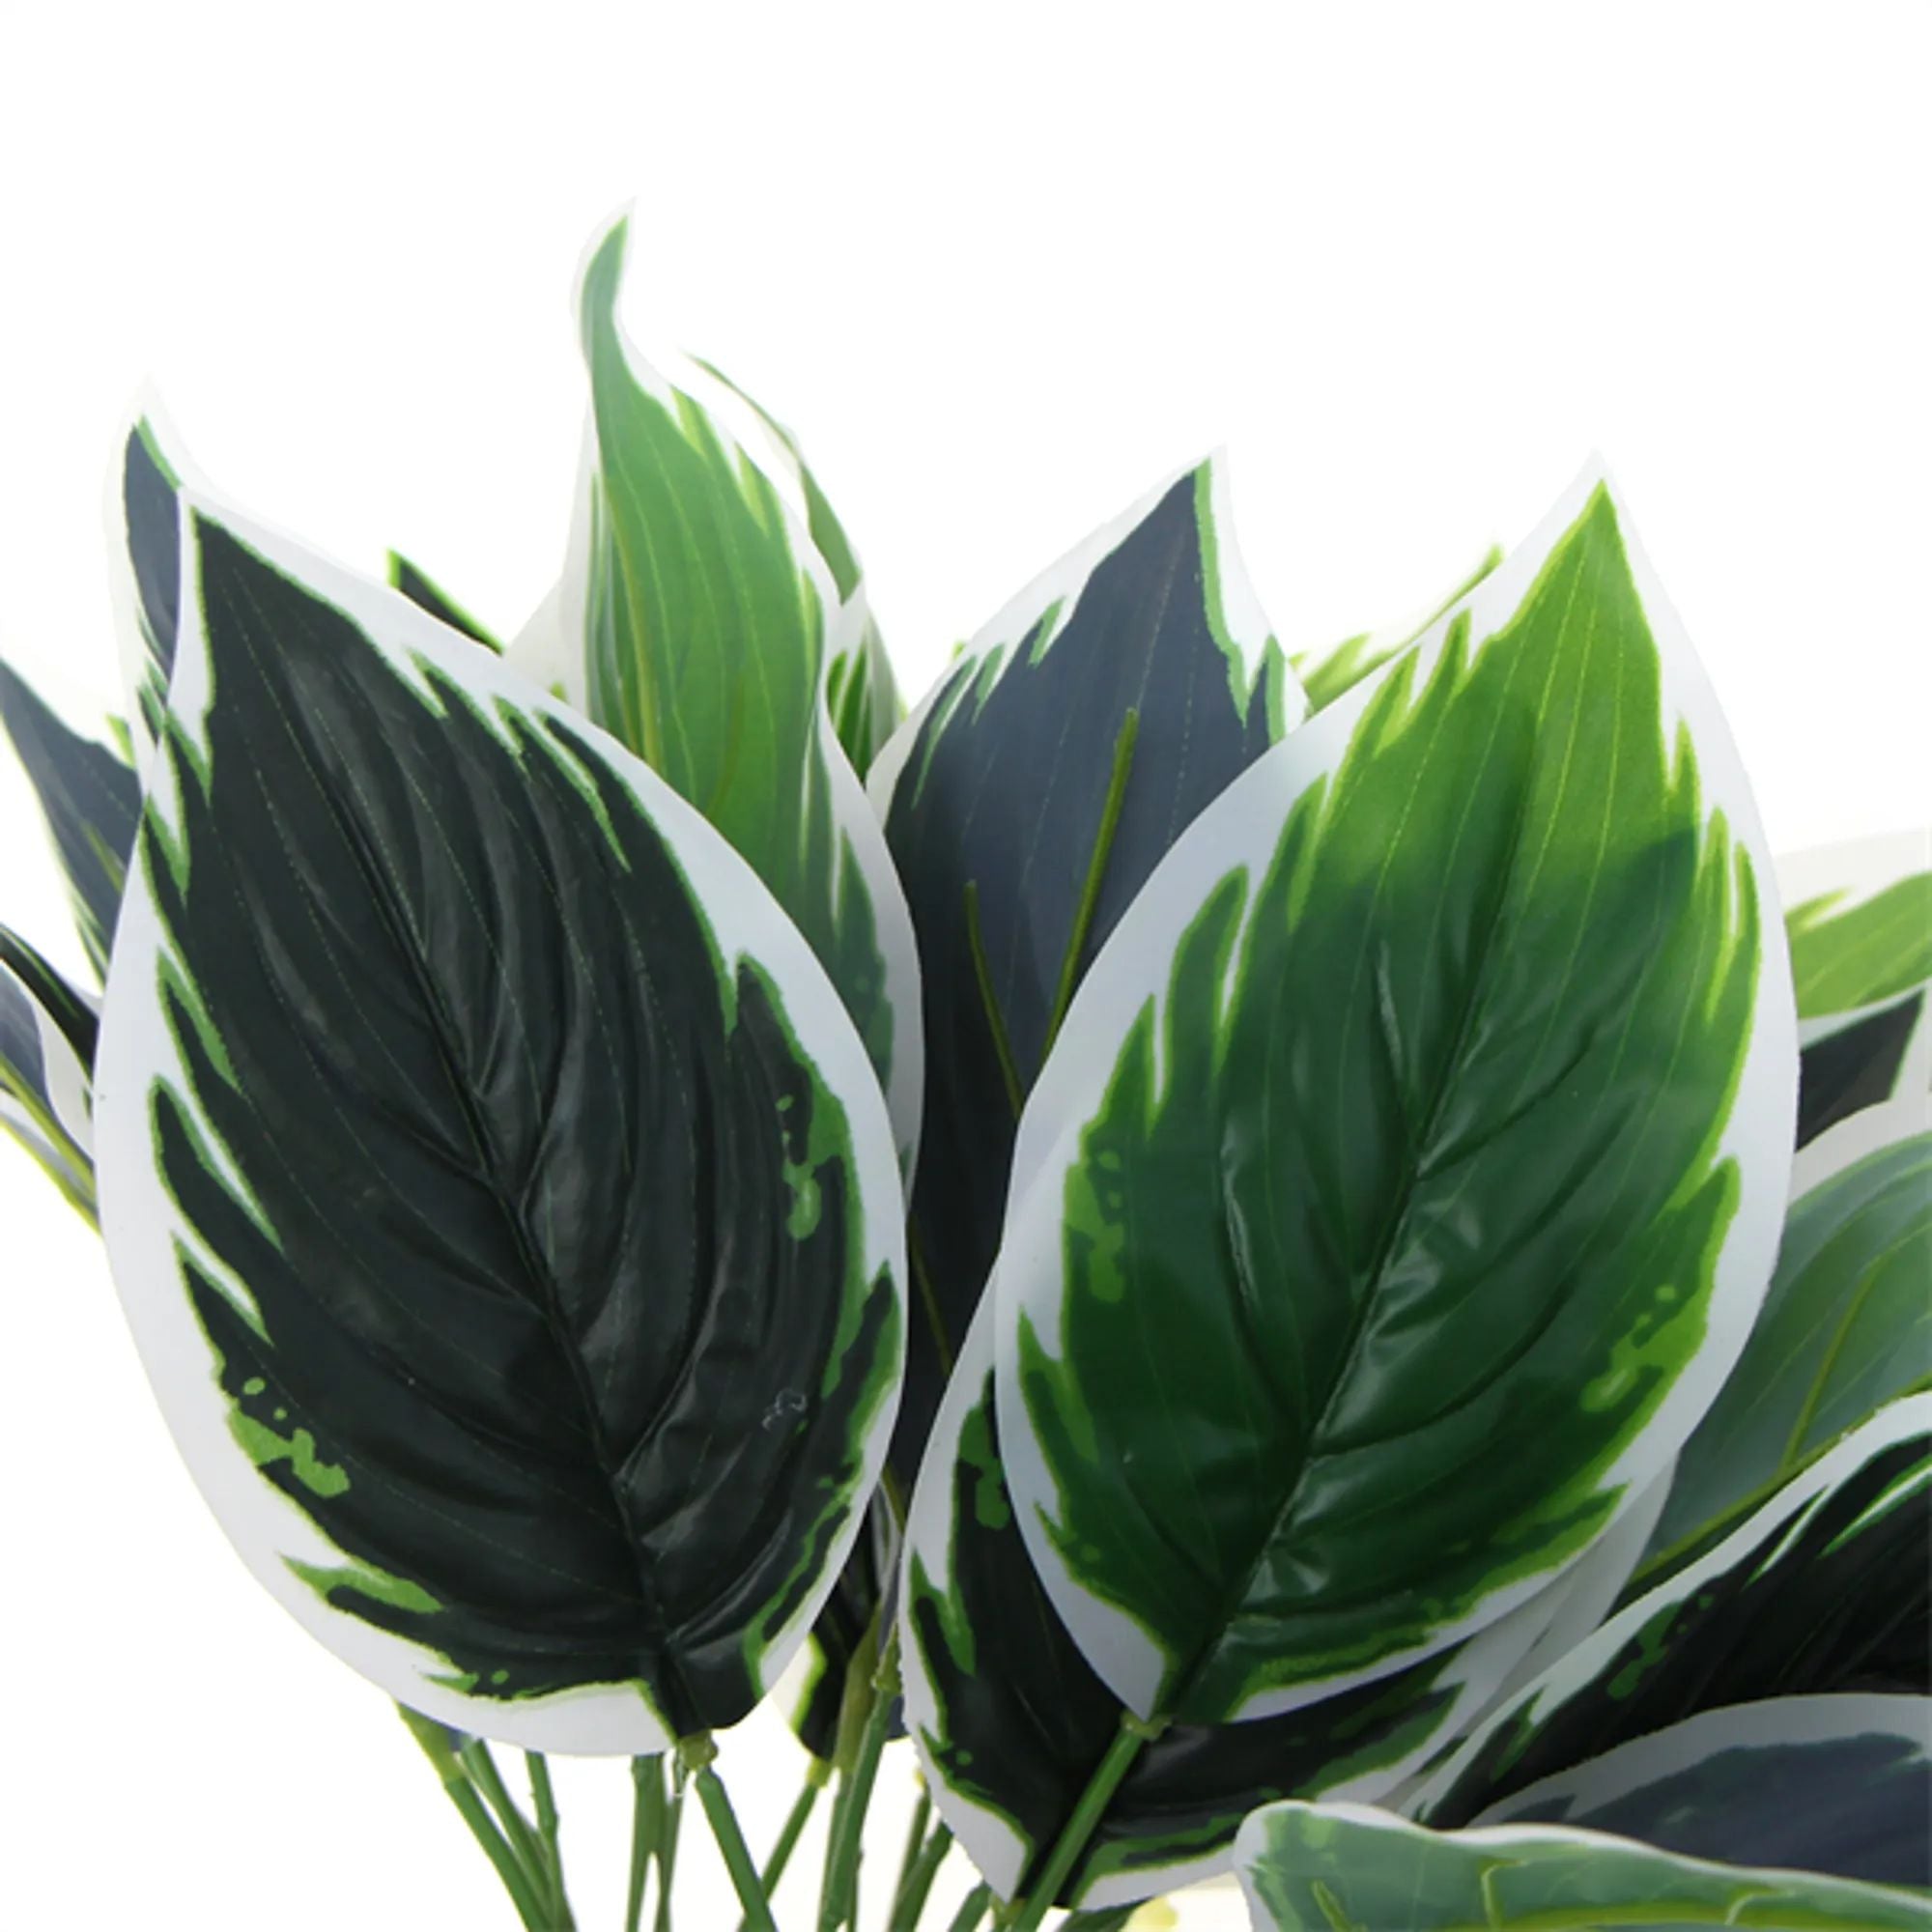 Dense Potted Artificial Calathea Plant 35cm - Designer Vertical Gardens Artificial Shrubs and Small plants Office and House plants